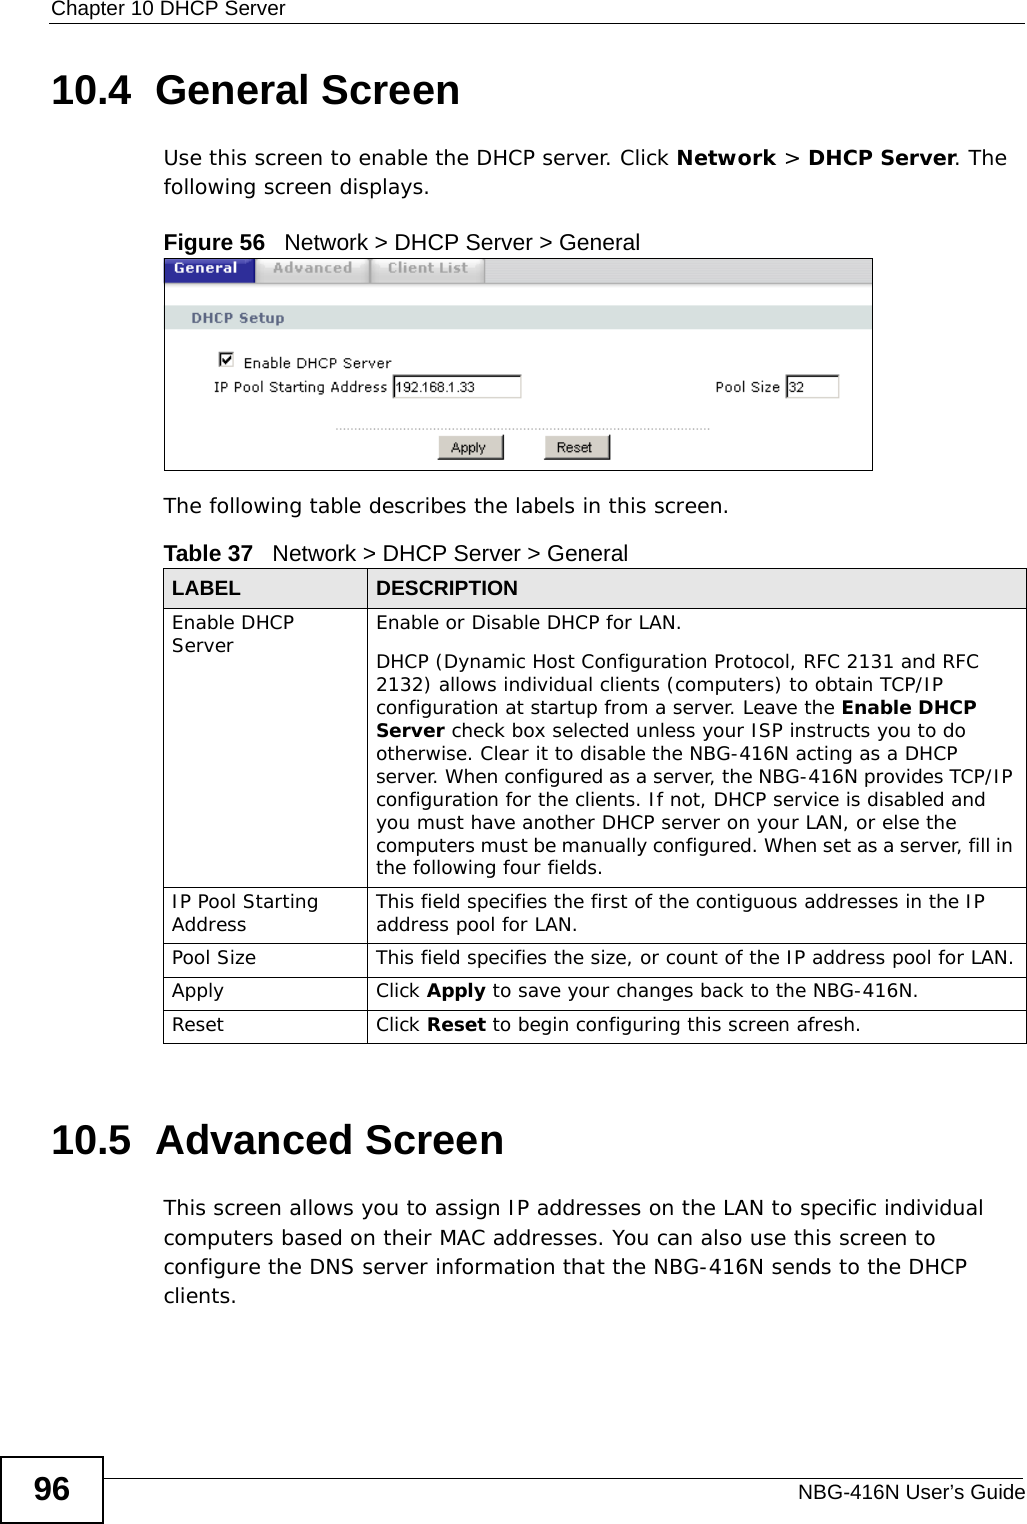 Chapter 10 DHCP ServerNBG-416N User’s Guide9610.4  General ScreenUse this screen to enable the DHCP server. Click Network &gt; DHCP Server. The following screen displays.Figure 56   Network &gt; DHCP Server &gt; General   The following table describes the labels in this screen.10.5  Advanced Screen    This screen allows you to assign IP addresses on the LAN to specific individual computers based on their MAC addresses. You can also use this screen to configure the DNS server information that the NBG-416N sends to the DHCP clients.Table 37   Network &gt; DHCP Server &gt; GeneralLABEL DESCRIPTIONEnable DHCP Server Enable or Disable DHCP for LAN.DHCP (Dynamic Host Configuration Protocol, RFC 2131 and RFC 2132) allows individual clients (computers) to obtain TCP/IP configuration at startup from a server. Leave the Enable DHCP Server check box selected unless your ISP instructs you to do otherwise. Clear it to disable the NBG-416N acting as a DHCP server. When configured as a server, the NBG-416N provides TCP/IP configuration for the clients. If not, DHCP service is disabled and you must have another DHCP server on your LAN, or else the computers must be manually configured. When set as a server, fill in the following four fields.IP Pool Starting Address This field specifies the first of the contiguous addresses in the IP address pool for LAN.Pool Size This field specifies the size, or count of the IP address pool for LAN.Apply Click Apply to save your changes back to the NBG-416N.Reset Click Reset to begin configuring this screen afresh.